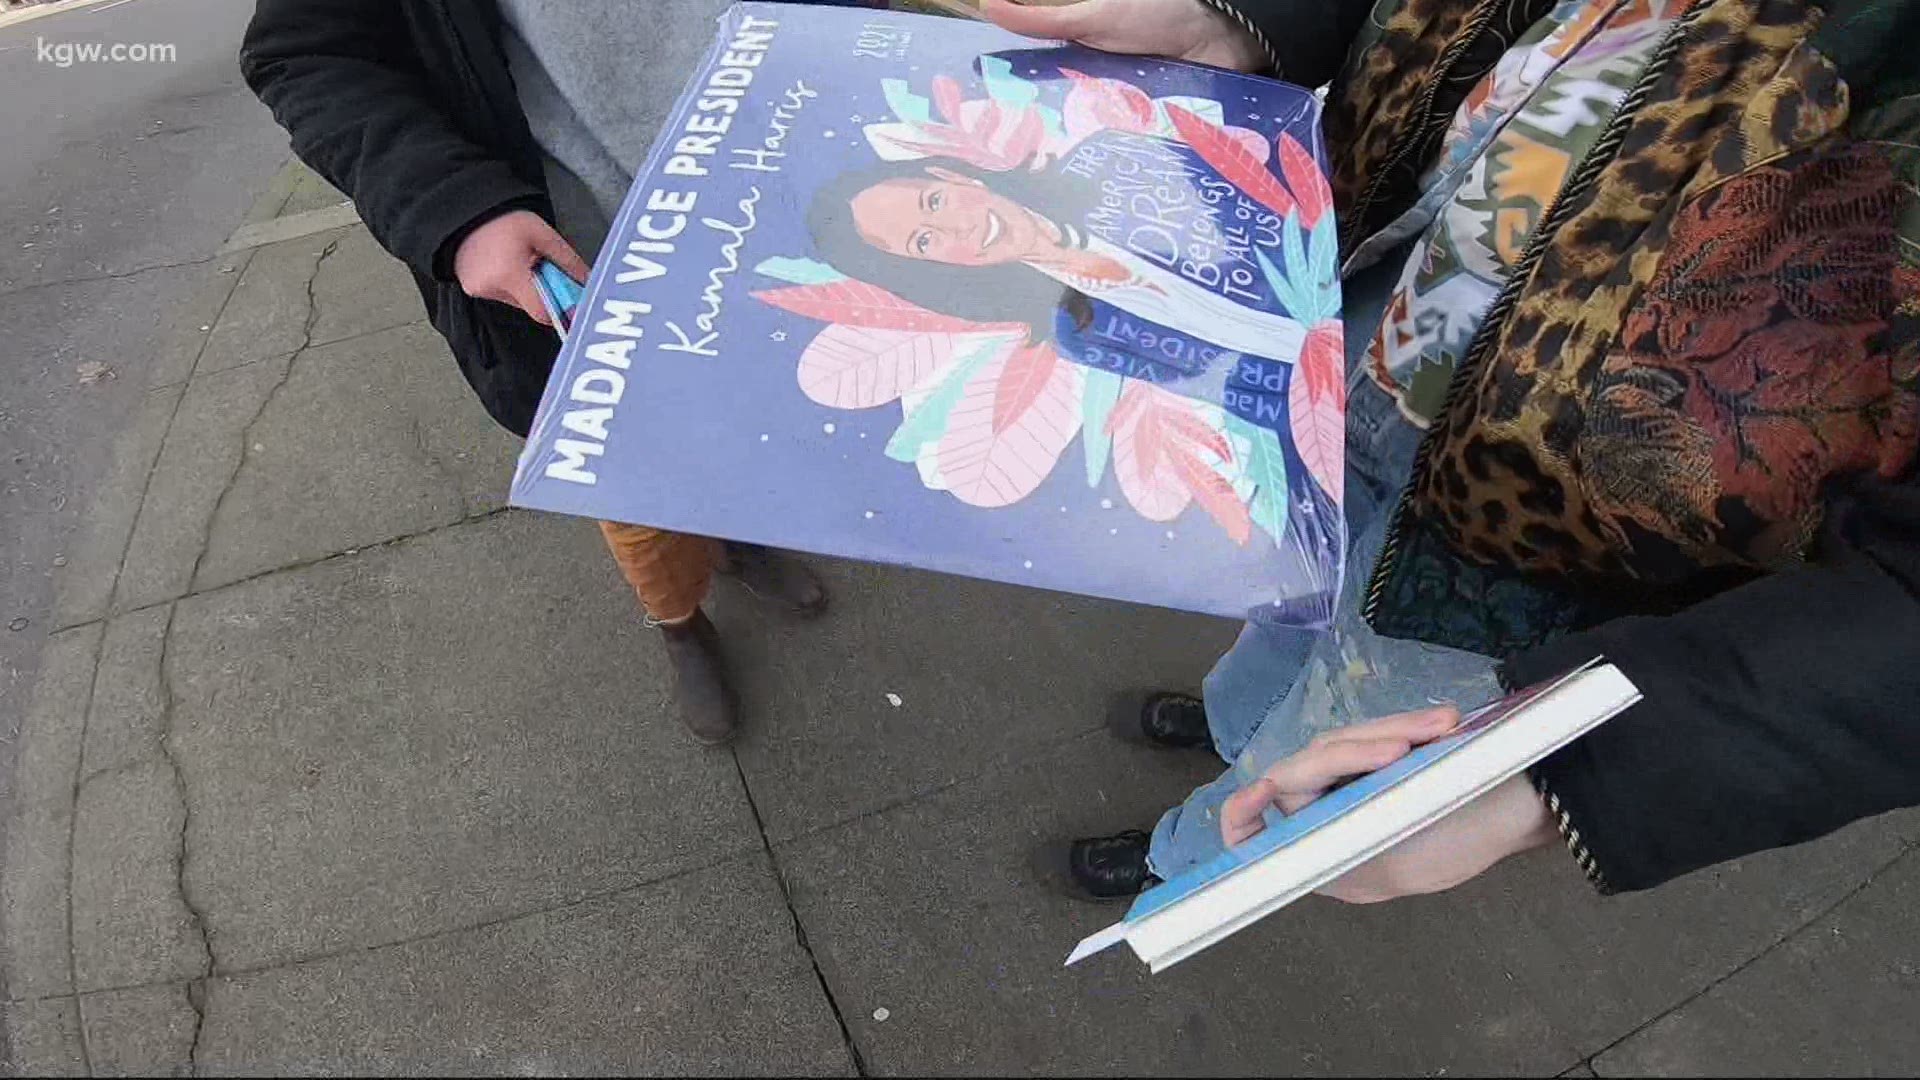 A Portland bookstore marks inauguration day with the gift of words. KGW spoke with the owners of Broadway Books about their second Inauguration Day book giveaway.